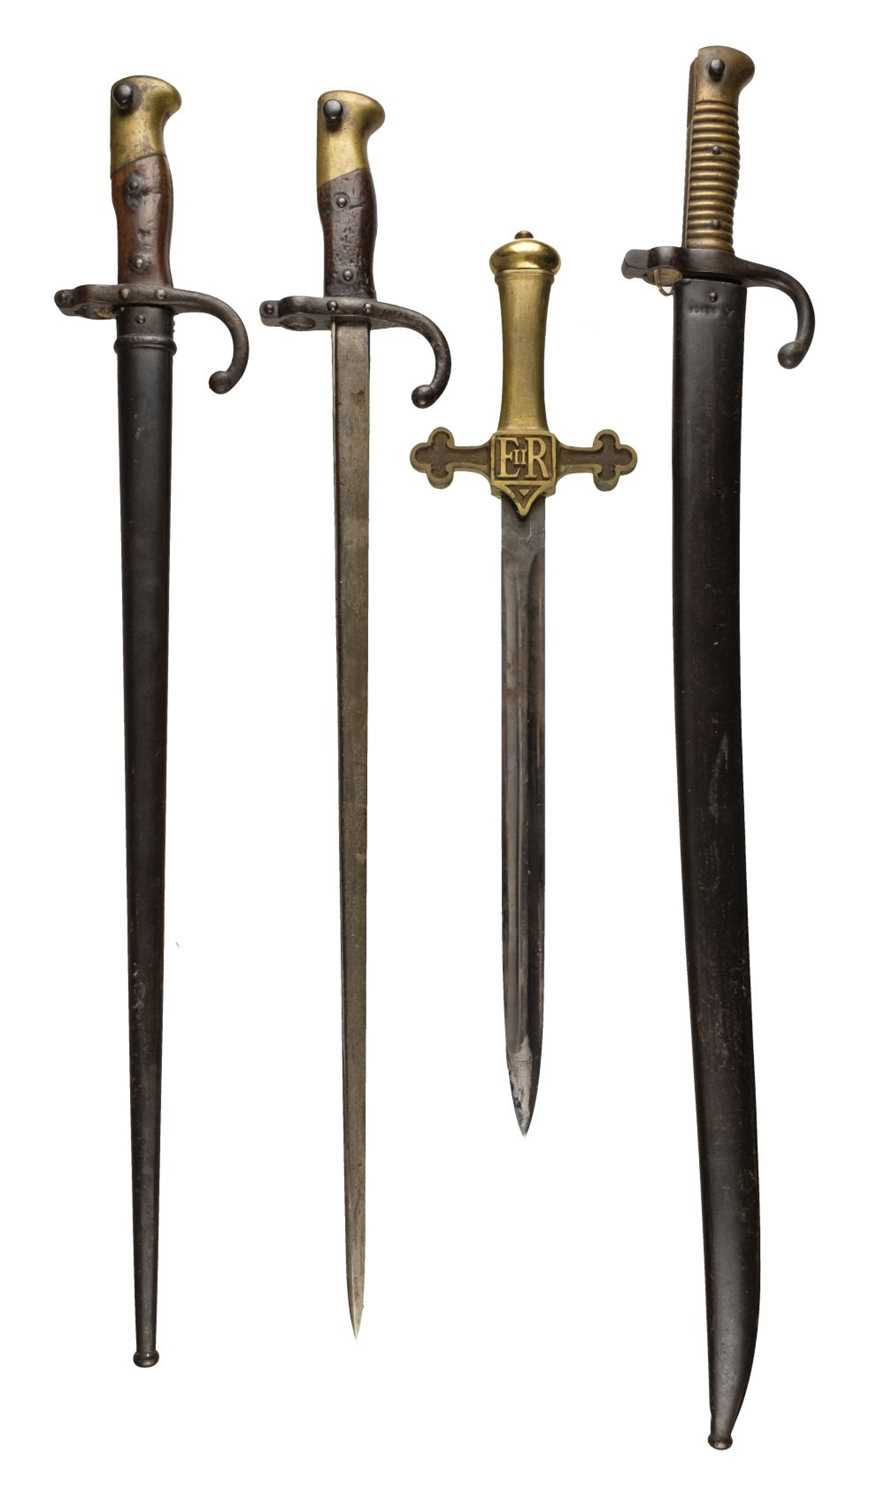 Lot 1 - Bayonets. A French chassepot bayonet plus two Gras and Drummer's sword